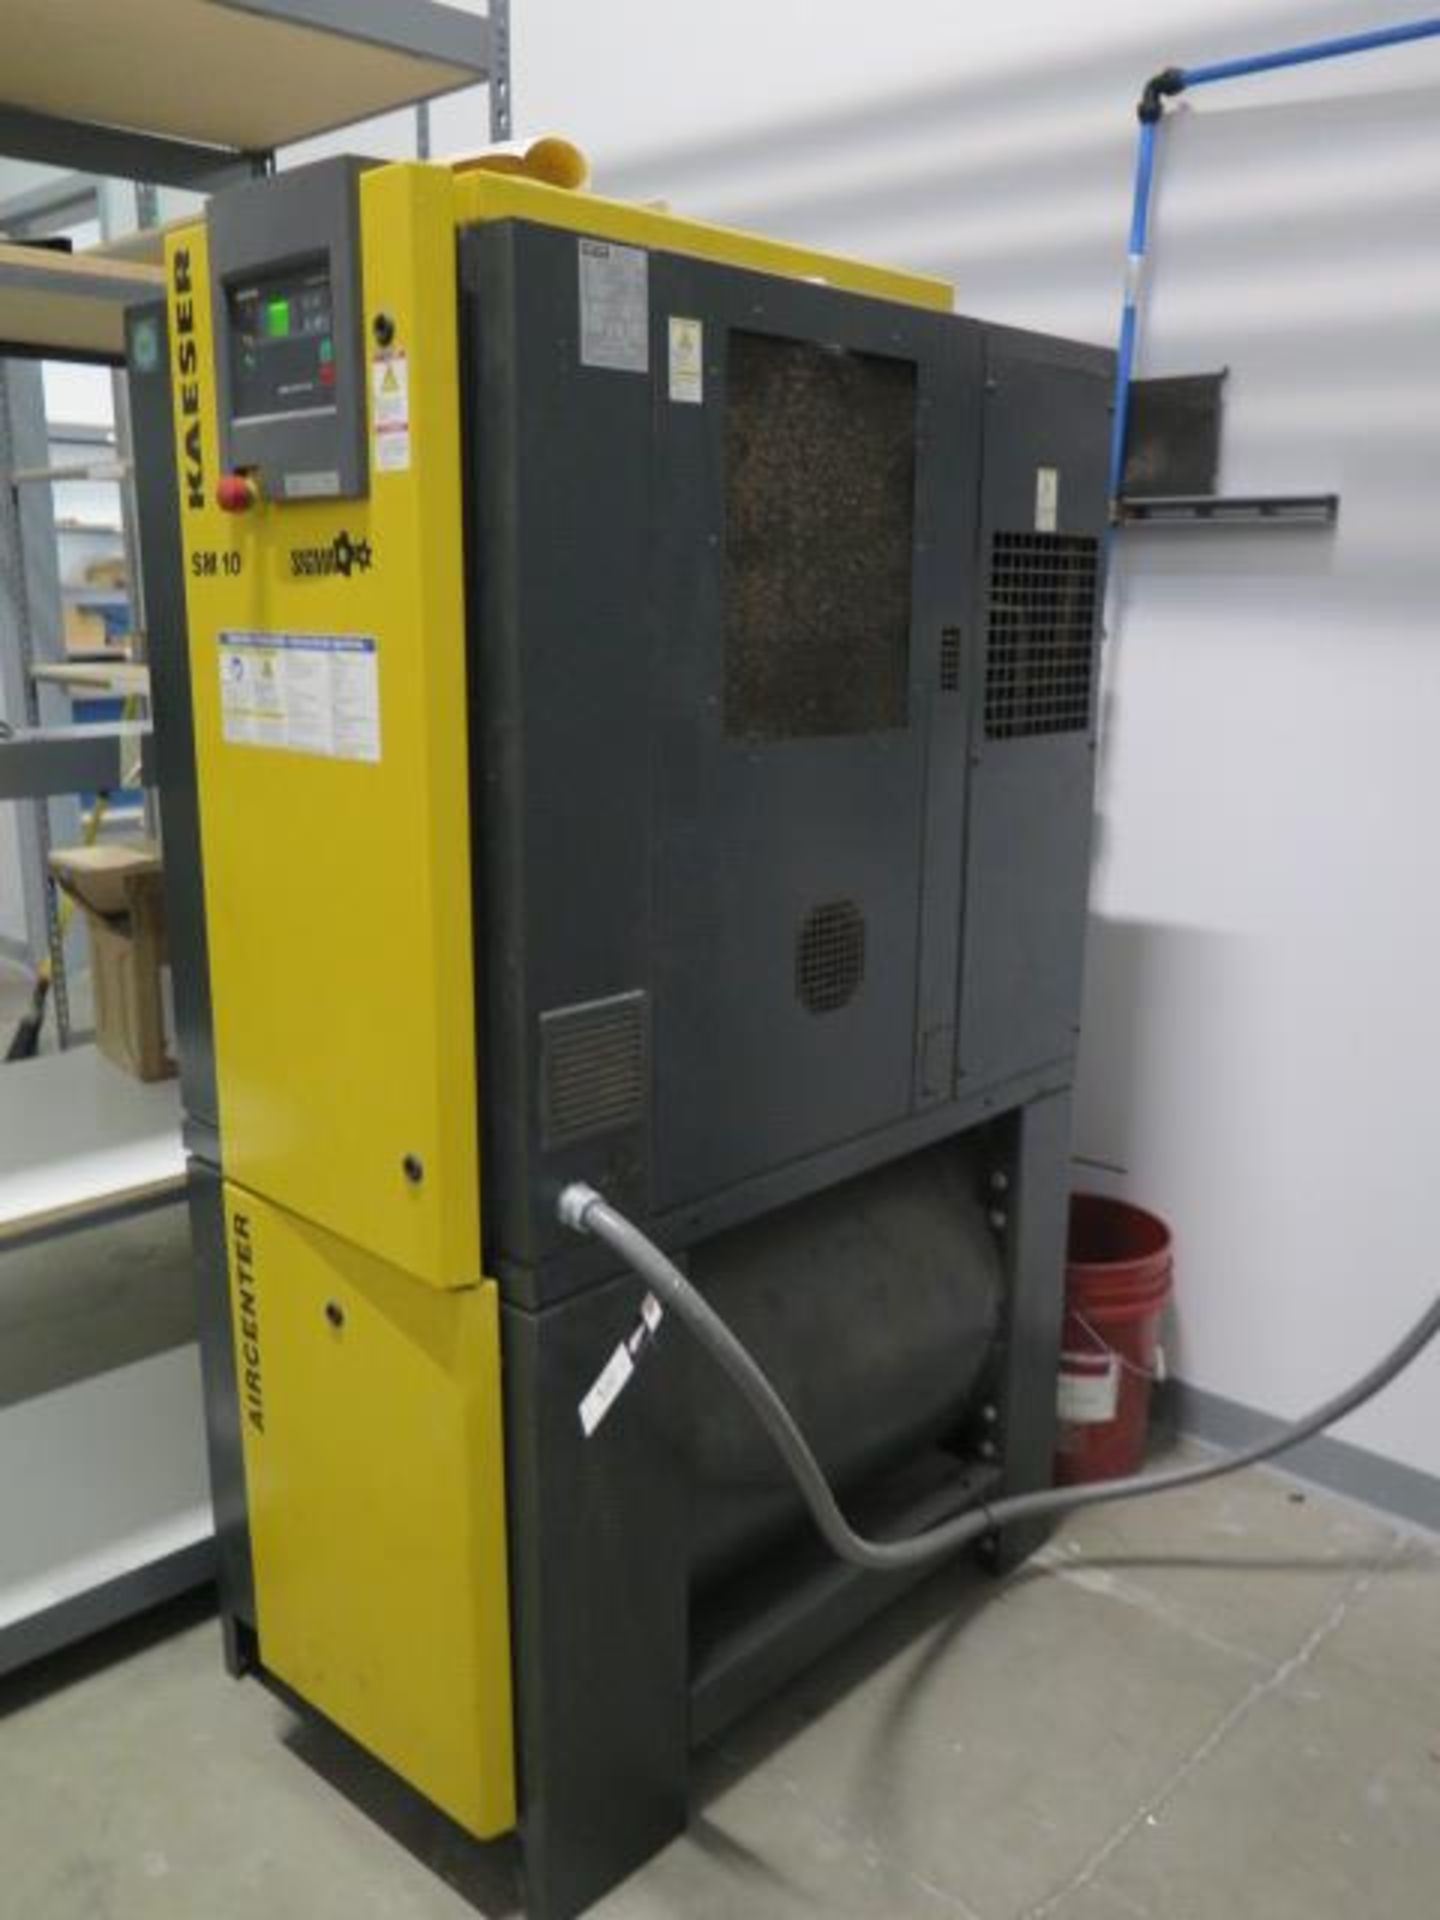 2015 Kaeser Aircenter SM10 10Hp Rotary Air Compressor s/n 1970 w/ Kaeser Sigma Controls, SOLD AS IS - Image 2 of 9